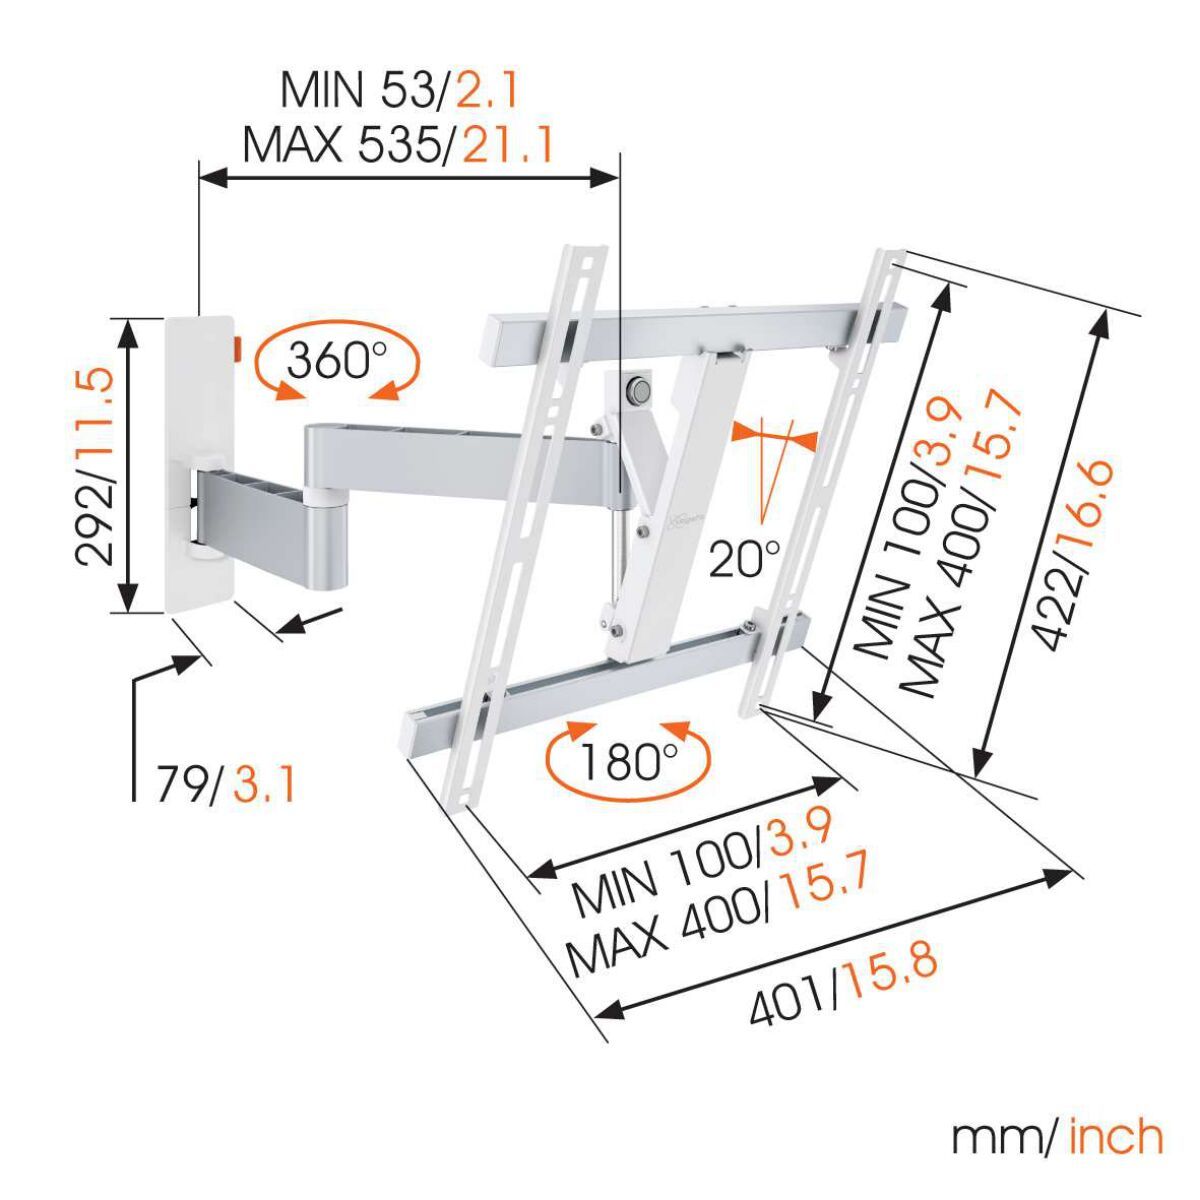 Vogel's WALL 3245 Full-Motion TV Wall Mount (white) - Suitable for 32 up to 55 inch TVs - Full motion (up to 180°) - Tilt up to 20° - Dimensions